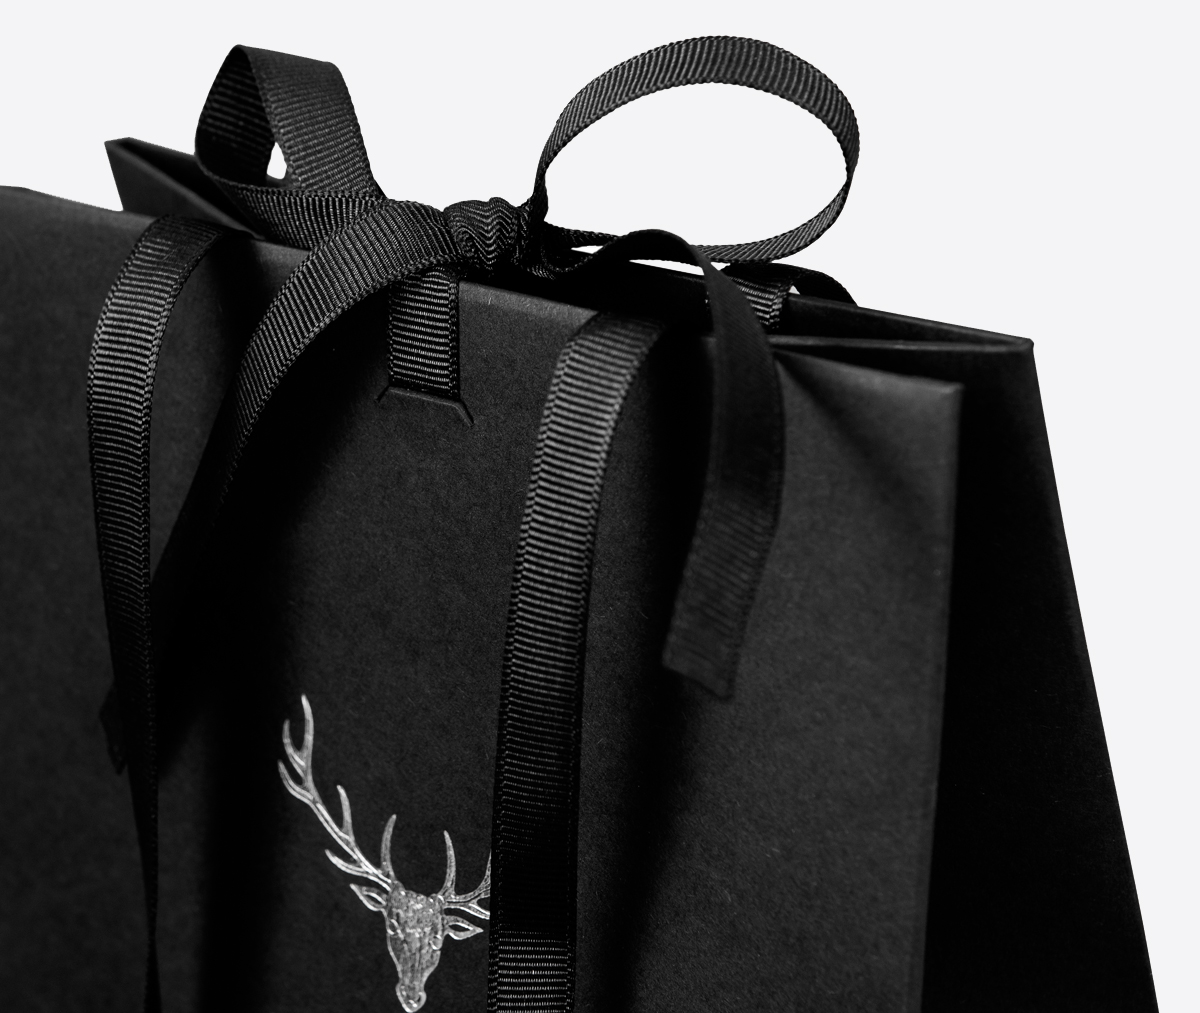 Promotional bag for liquors the Dalmore